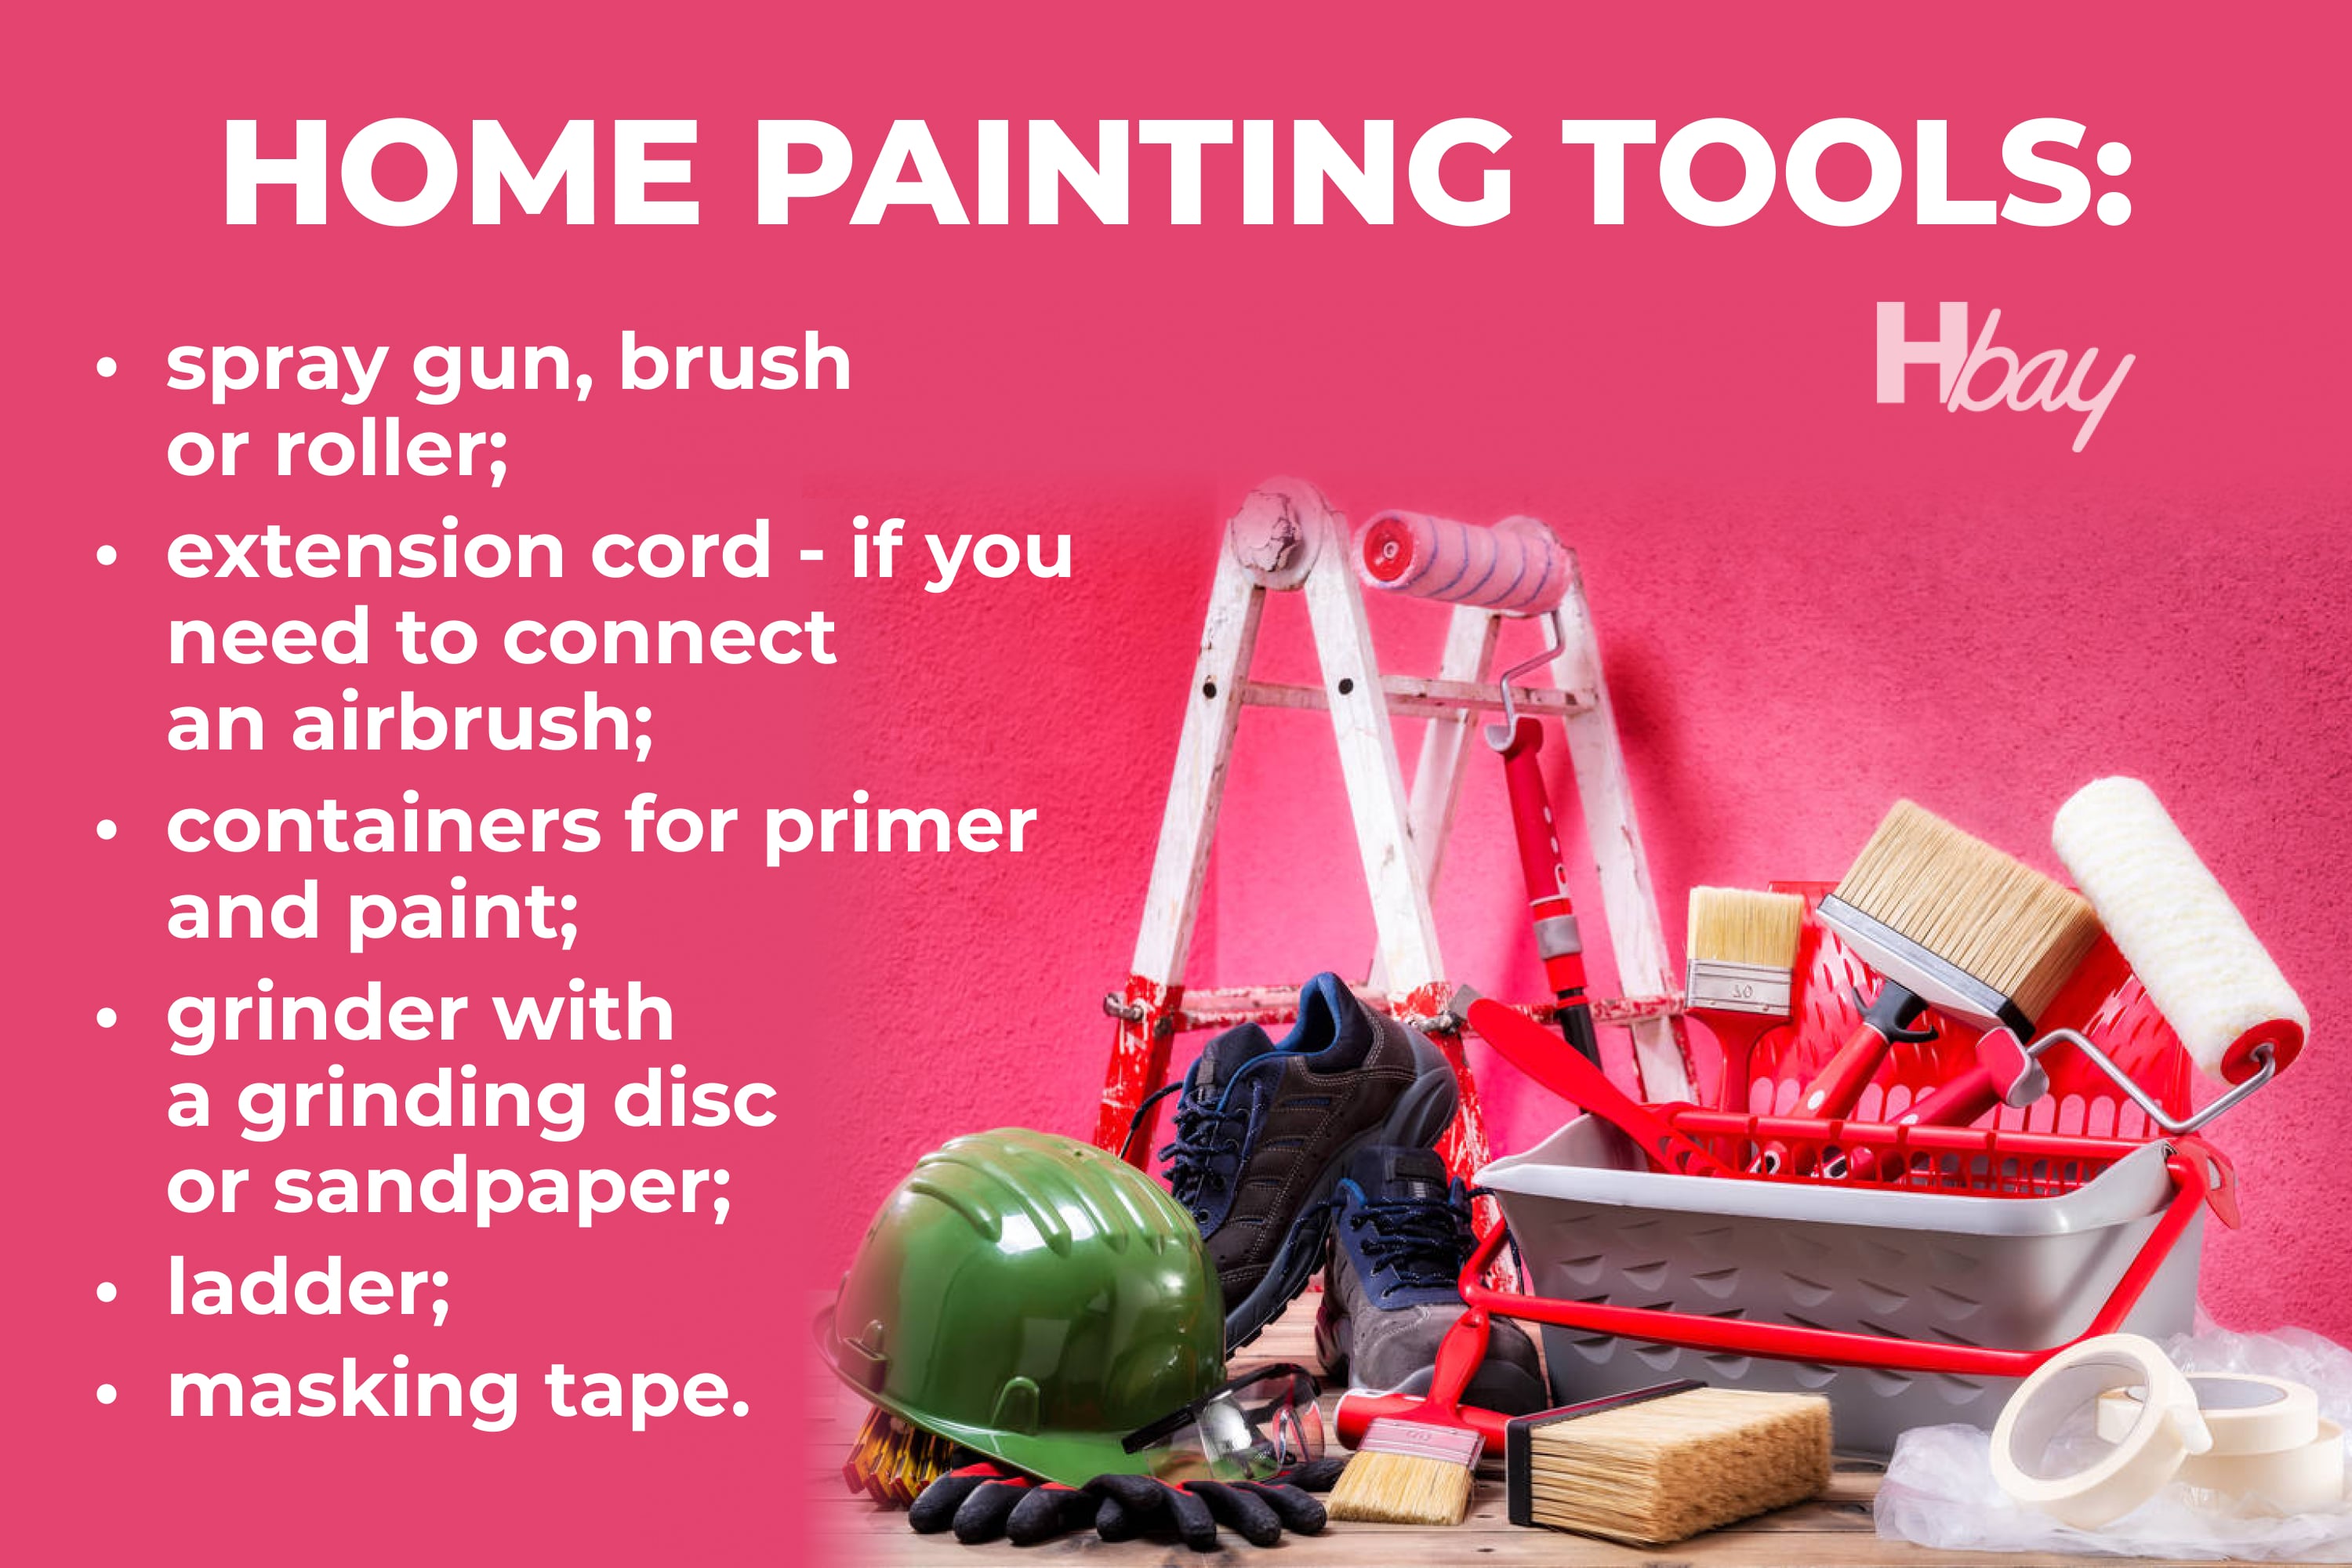 Home painting tools